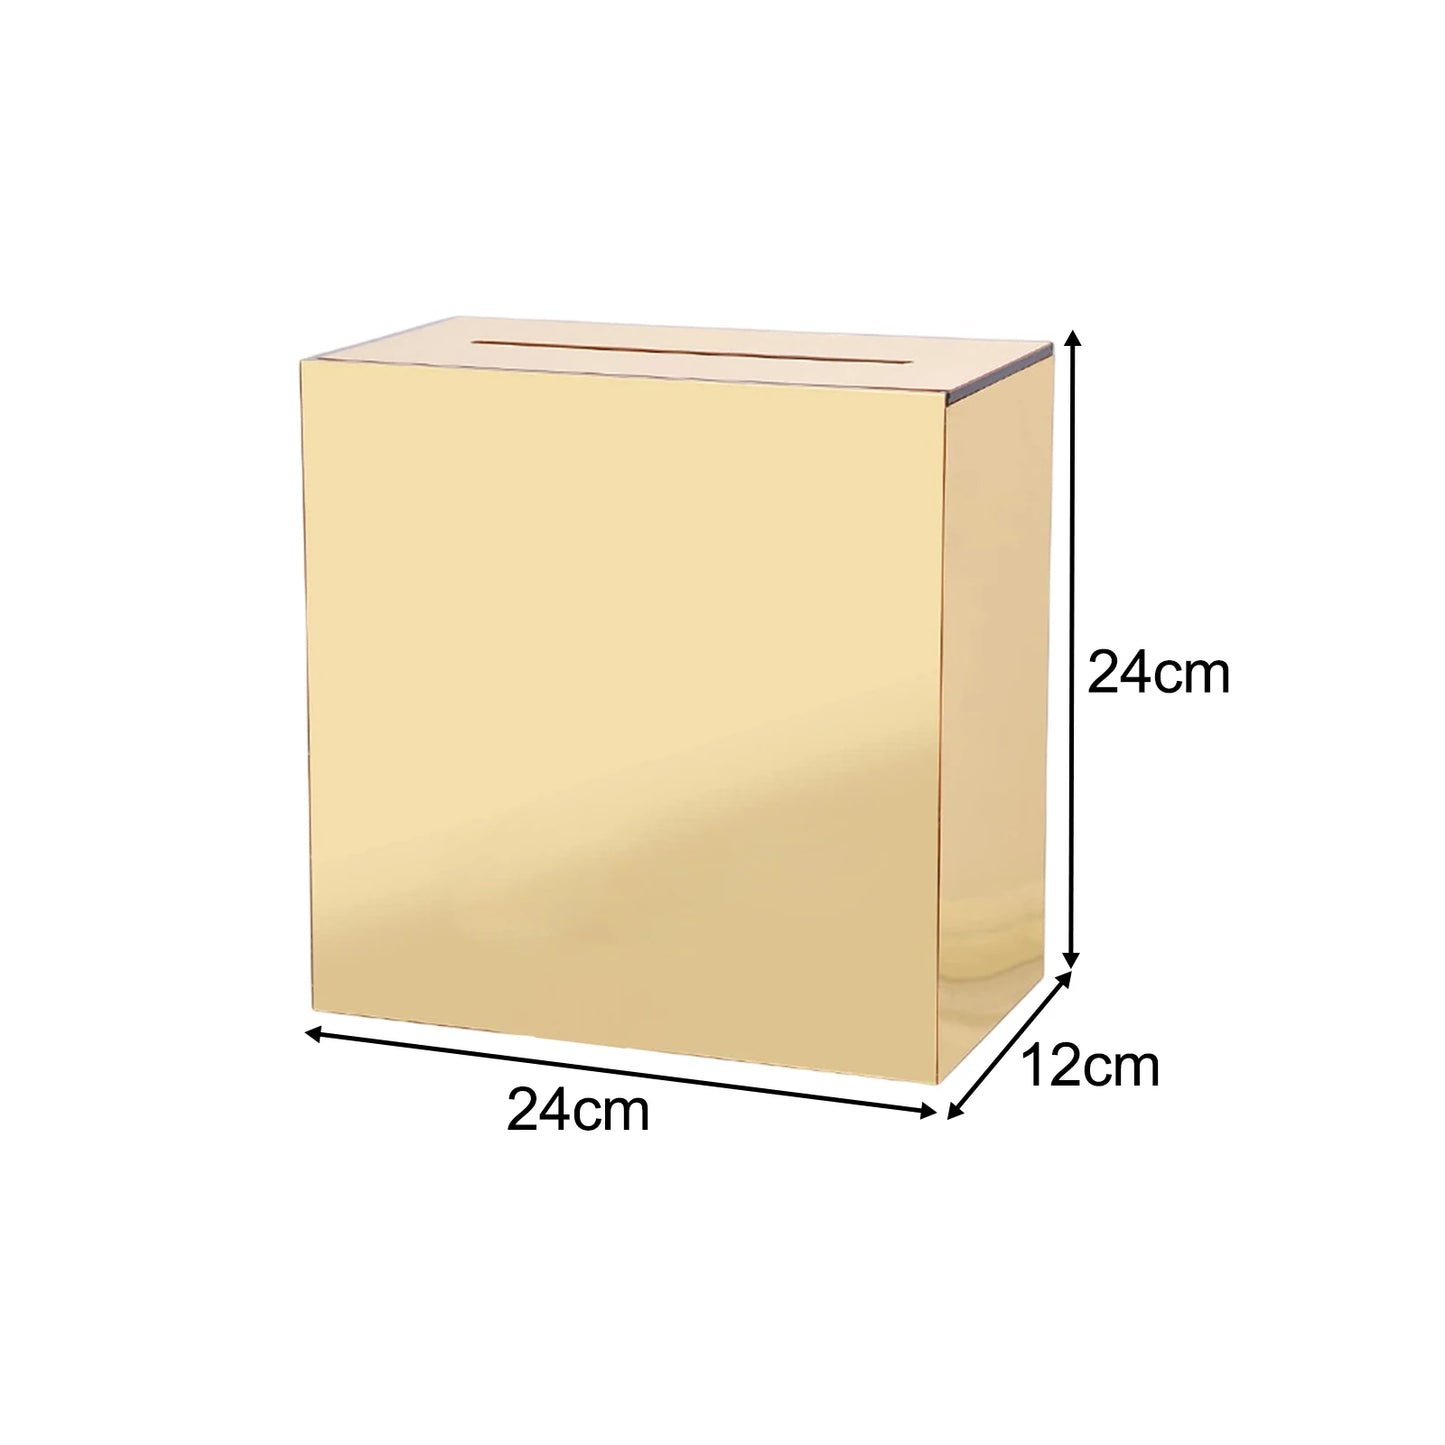 size of the acrylic card box